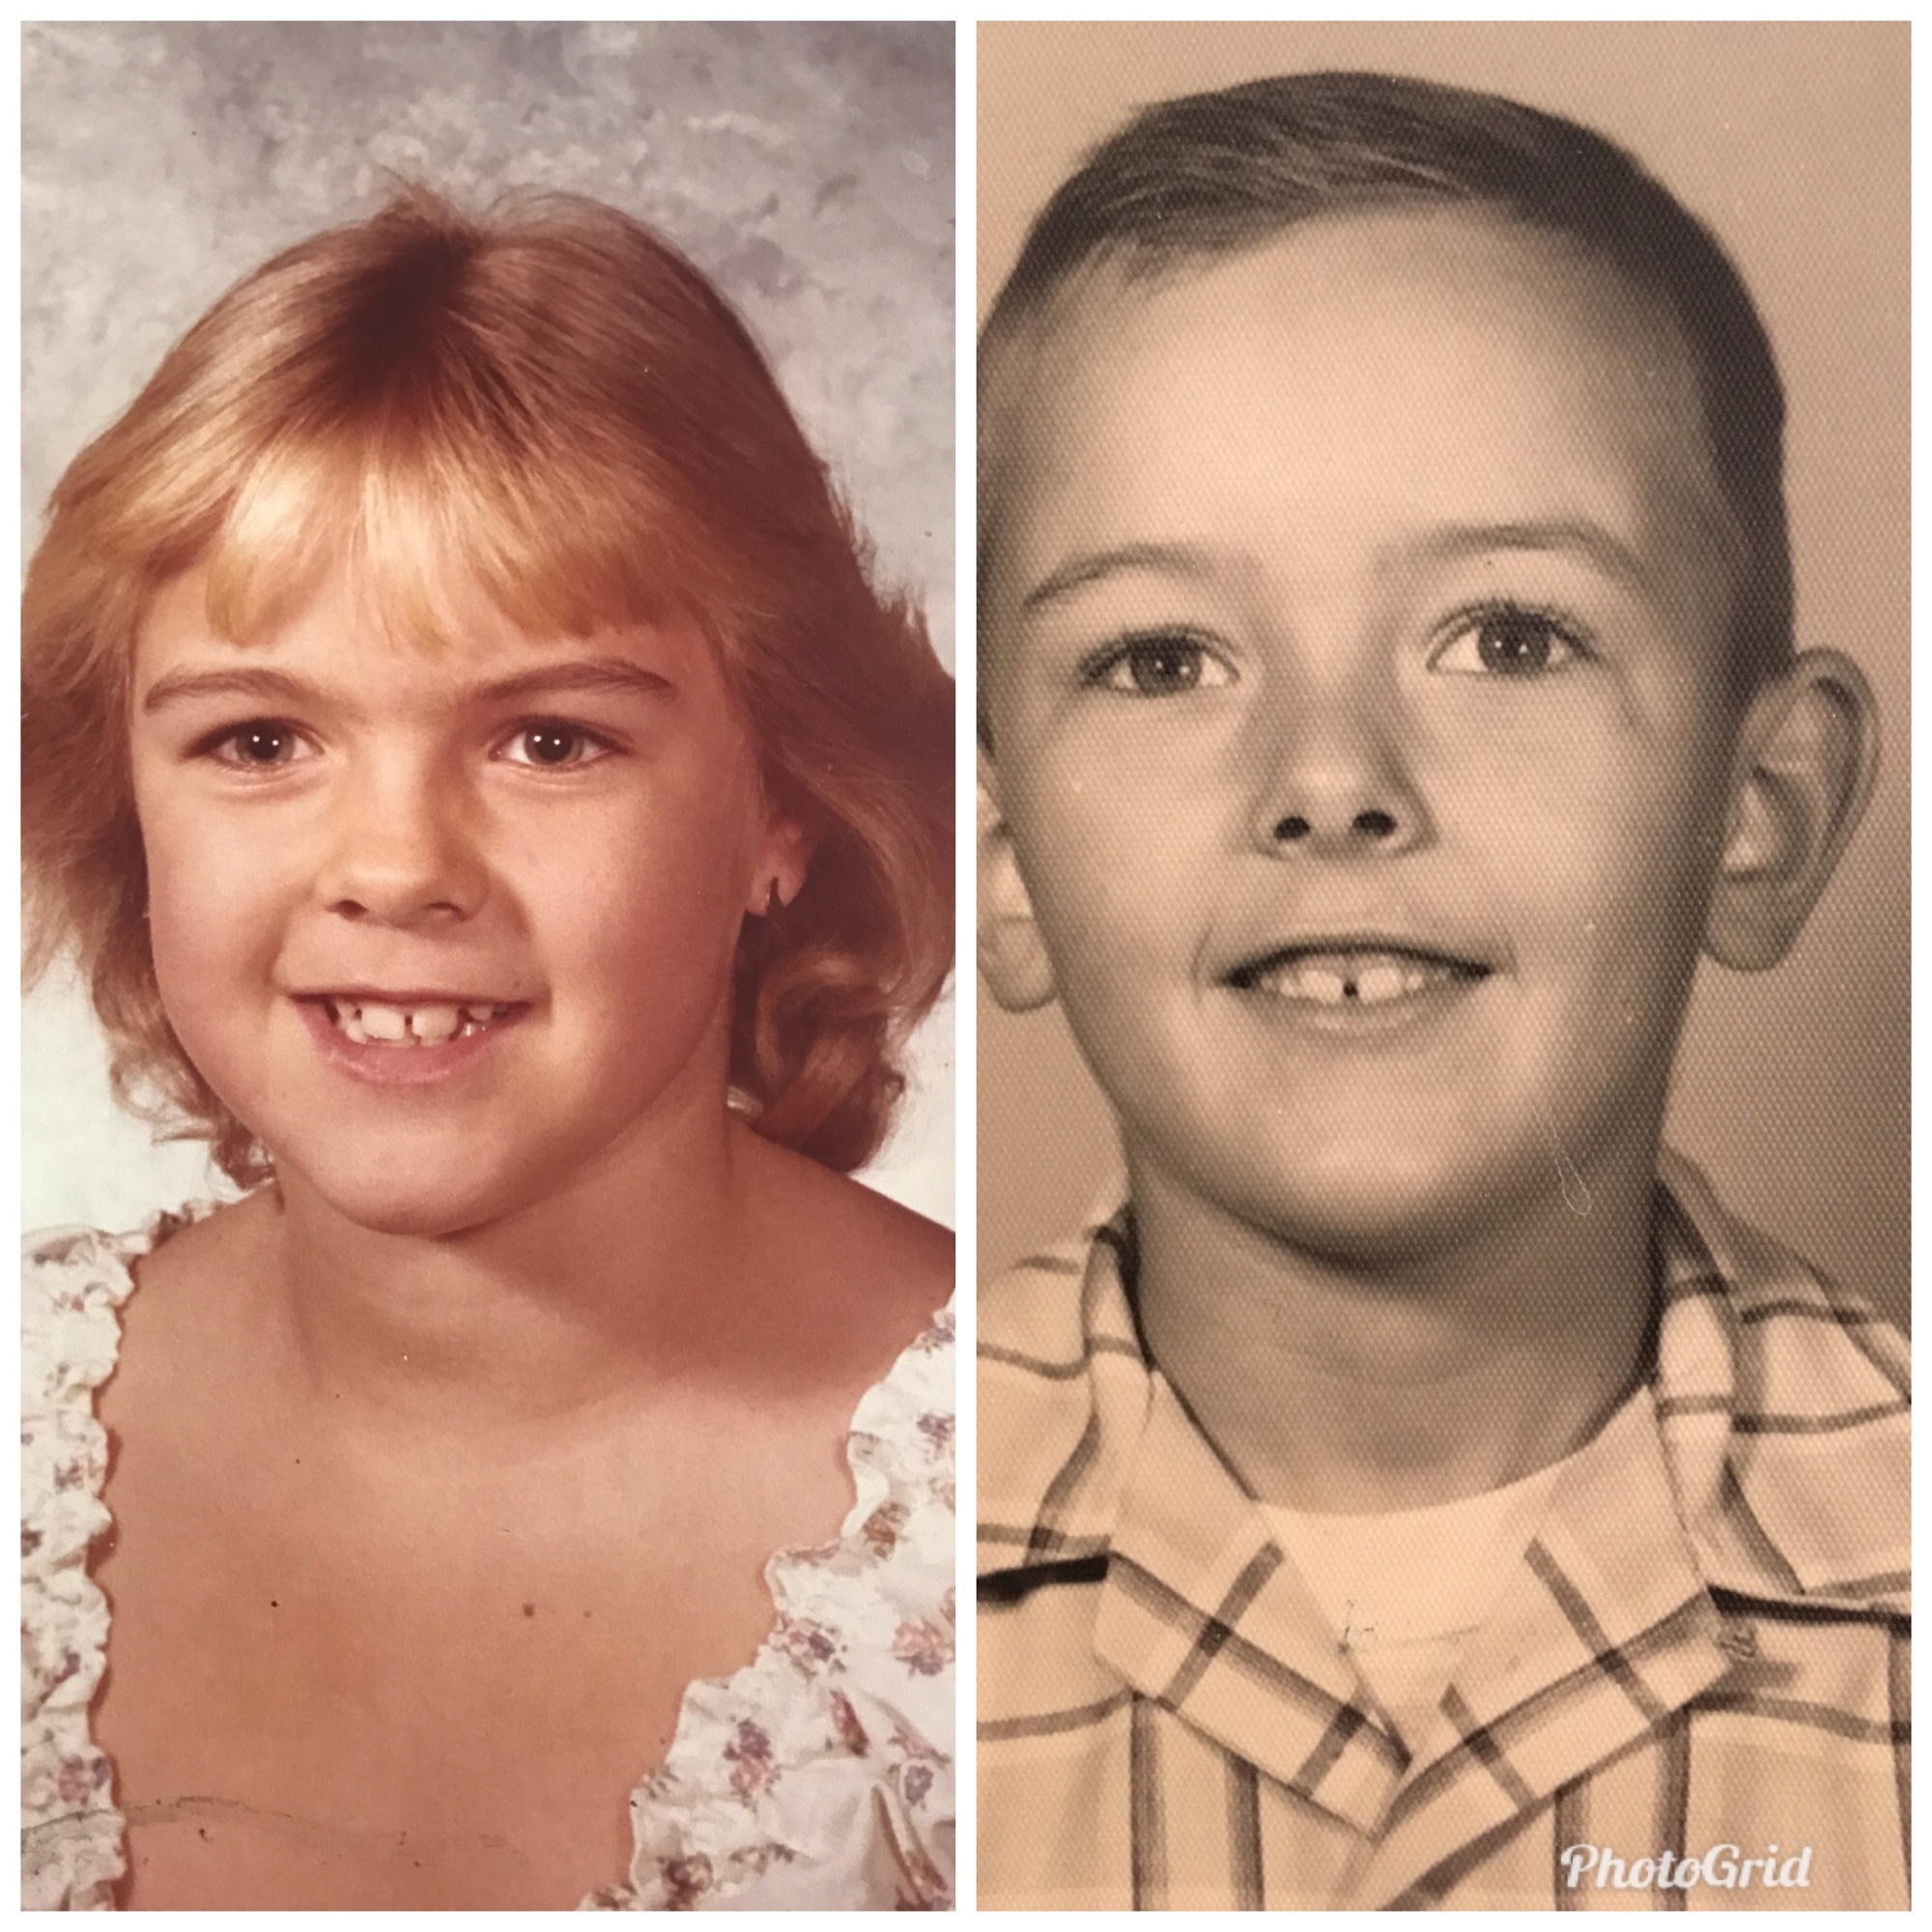 April Ciarlone, left, and her father, Barry Oldham, favor each other in their second grade photos.